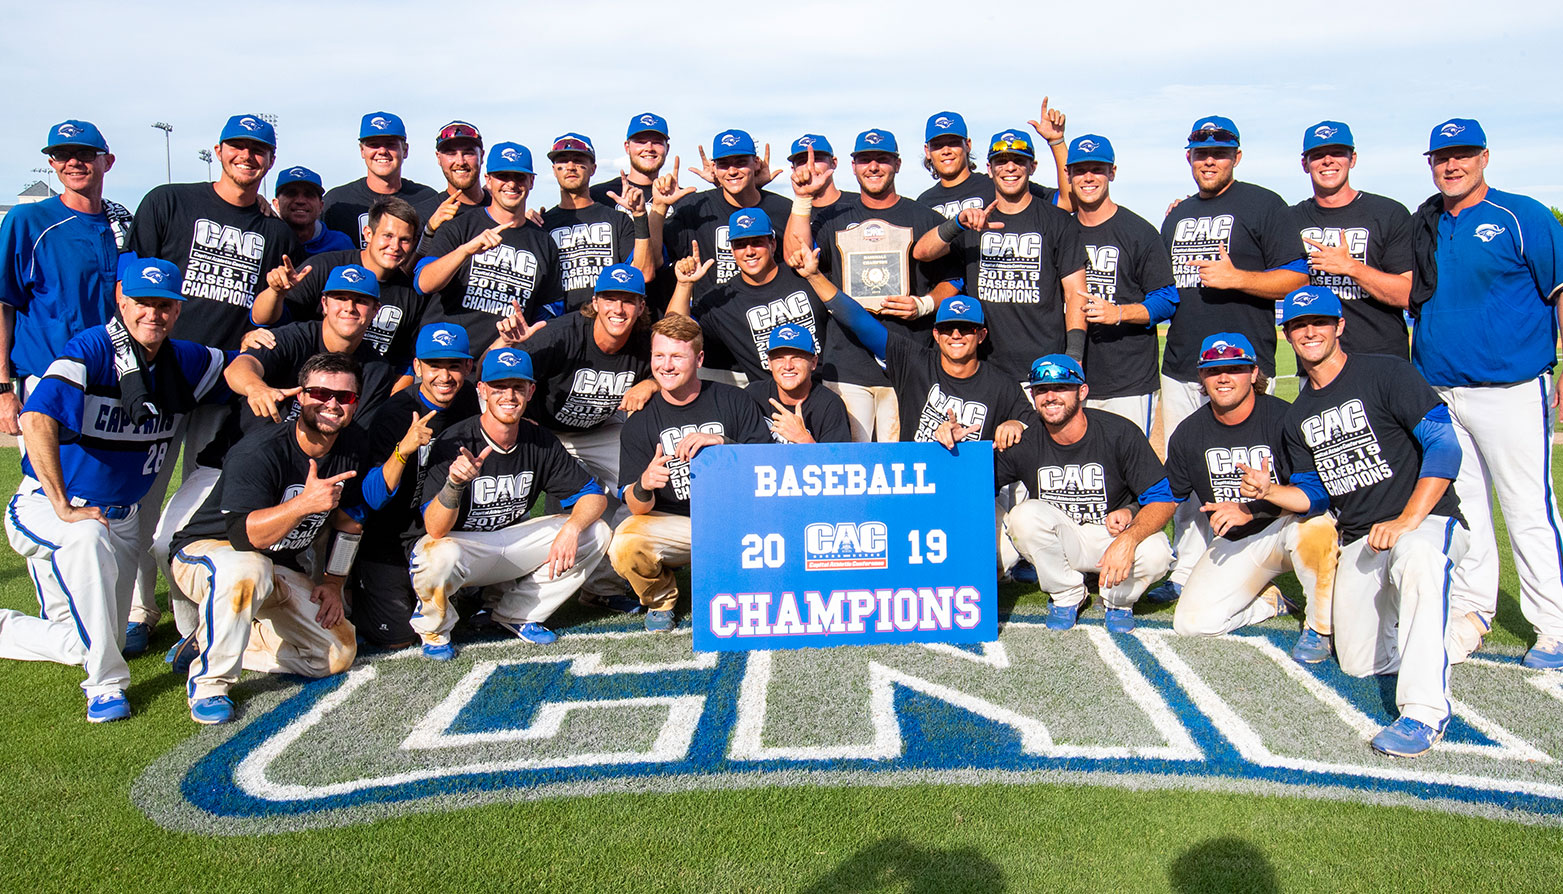 Christopher Newport Wins Twice, Captures First CAC Baseball Championship